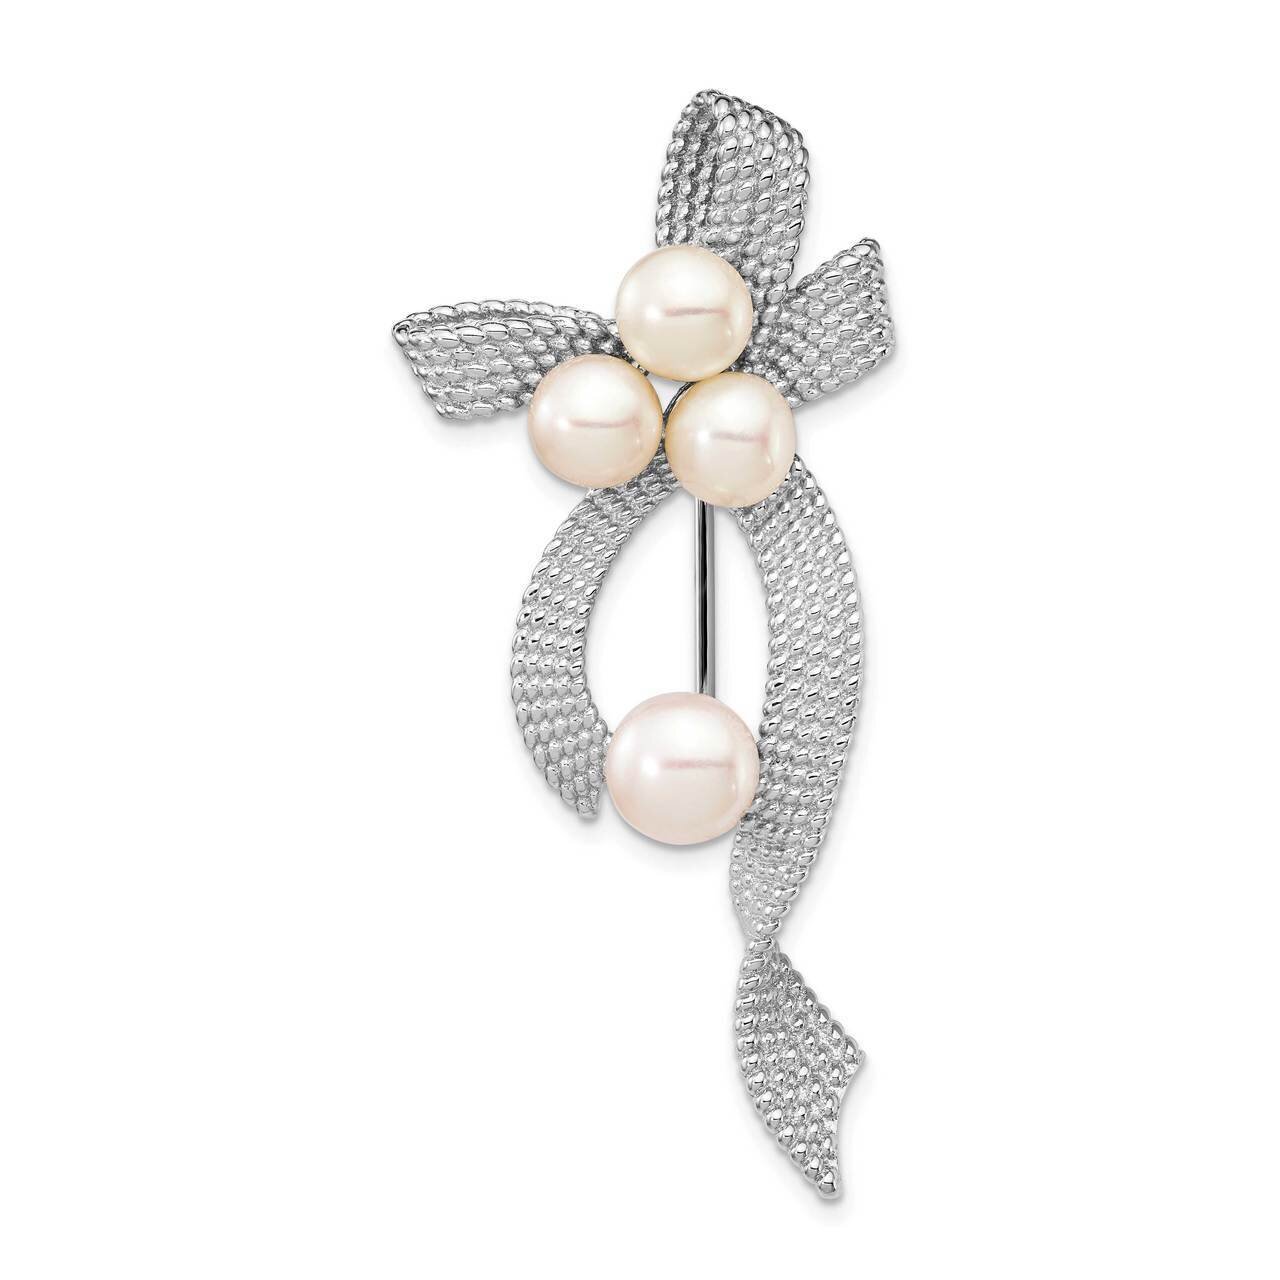 5-6mm White Button Freshwater Cultured Pearl Brooch Sterling Silver Rhodium Plated QP5043